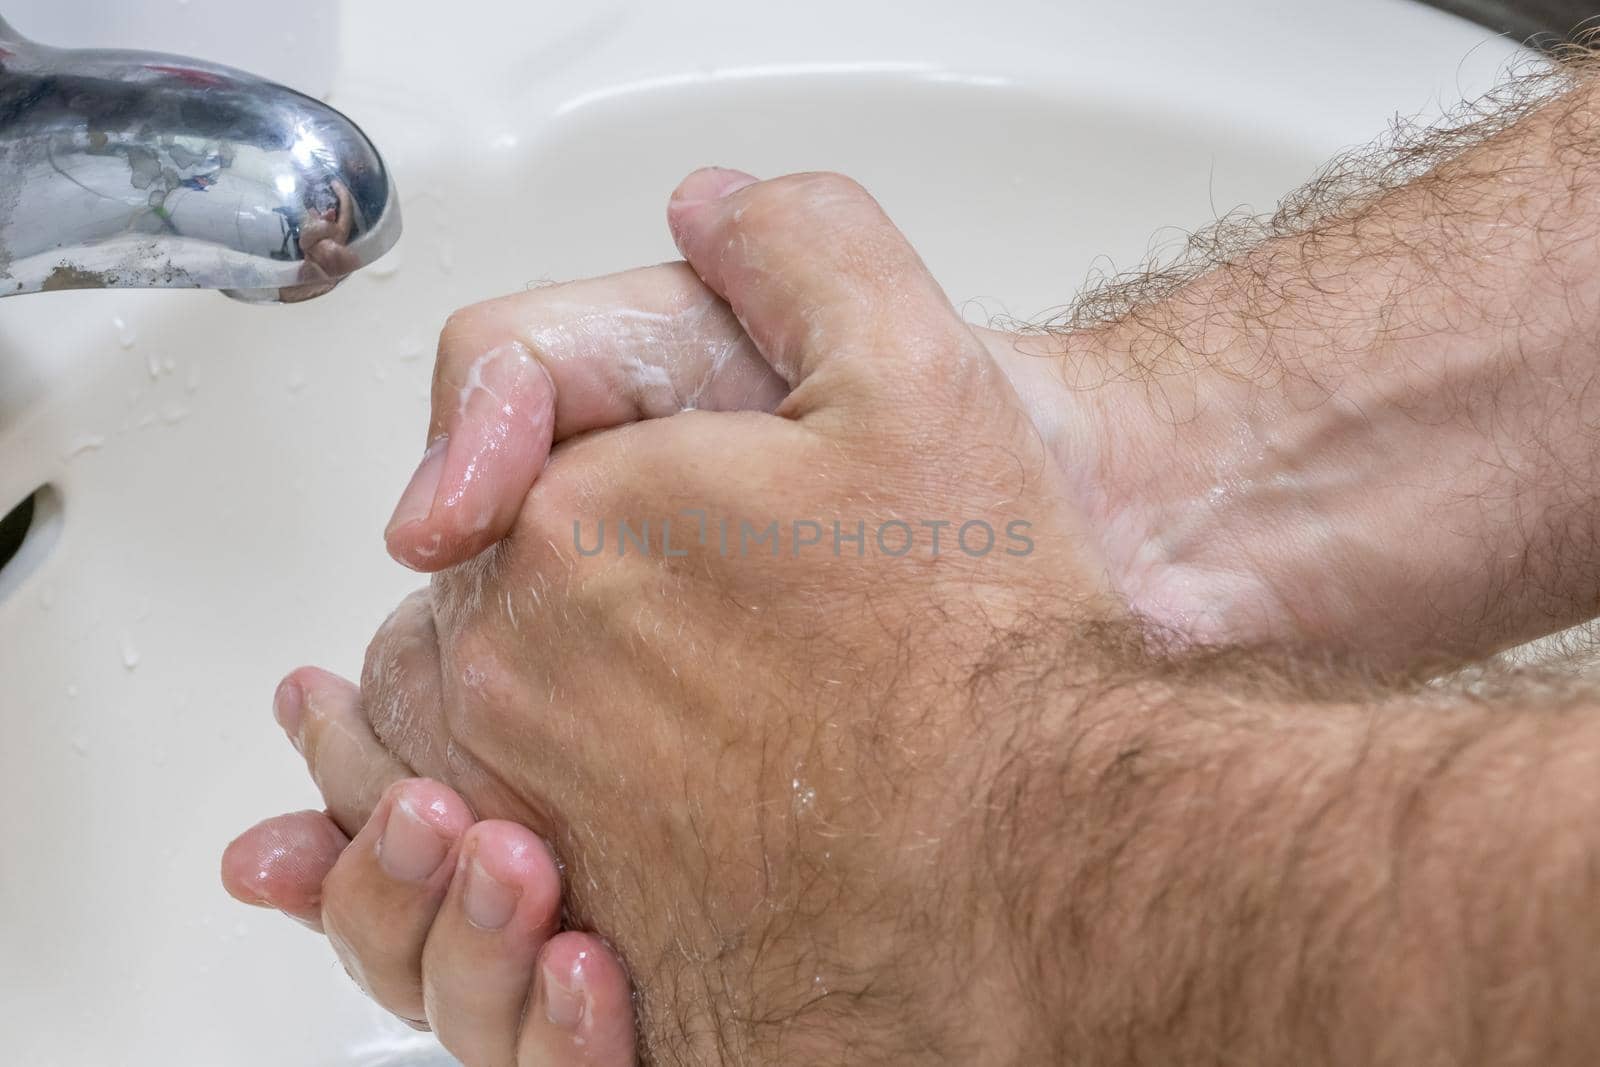 Man washing hands in basin close-up, one of several in handwashing steps series